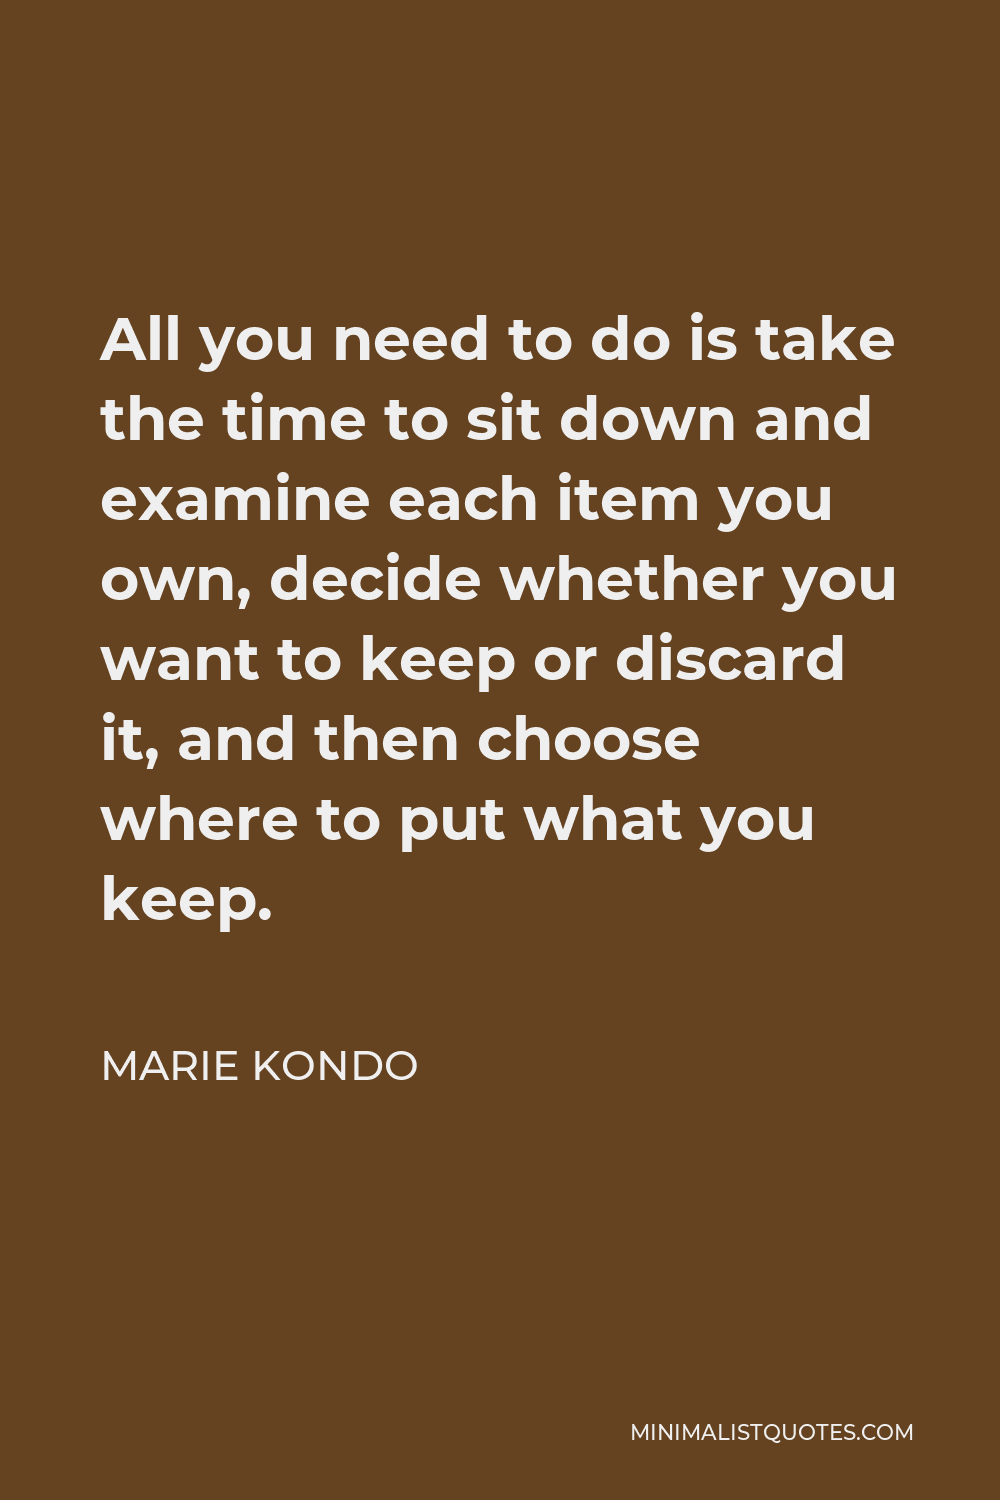 Marie Kondo Quote - All you need to do is take the time to sit down and examine each item you own, decide whether you want to keep or discard it, and then choose where to put what you keep.